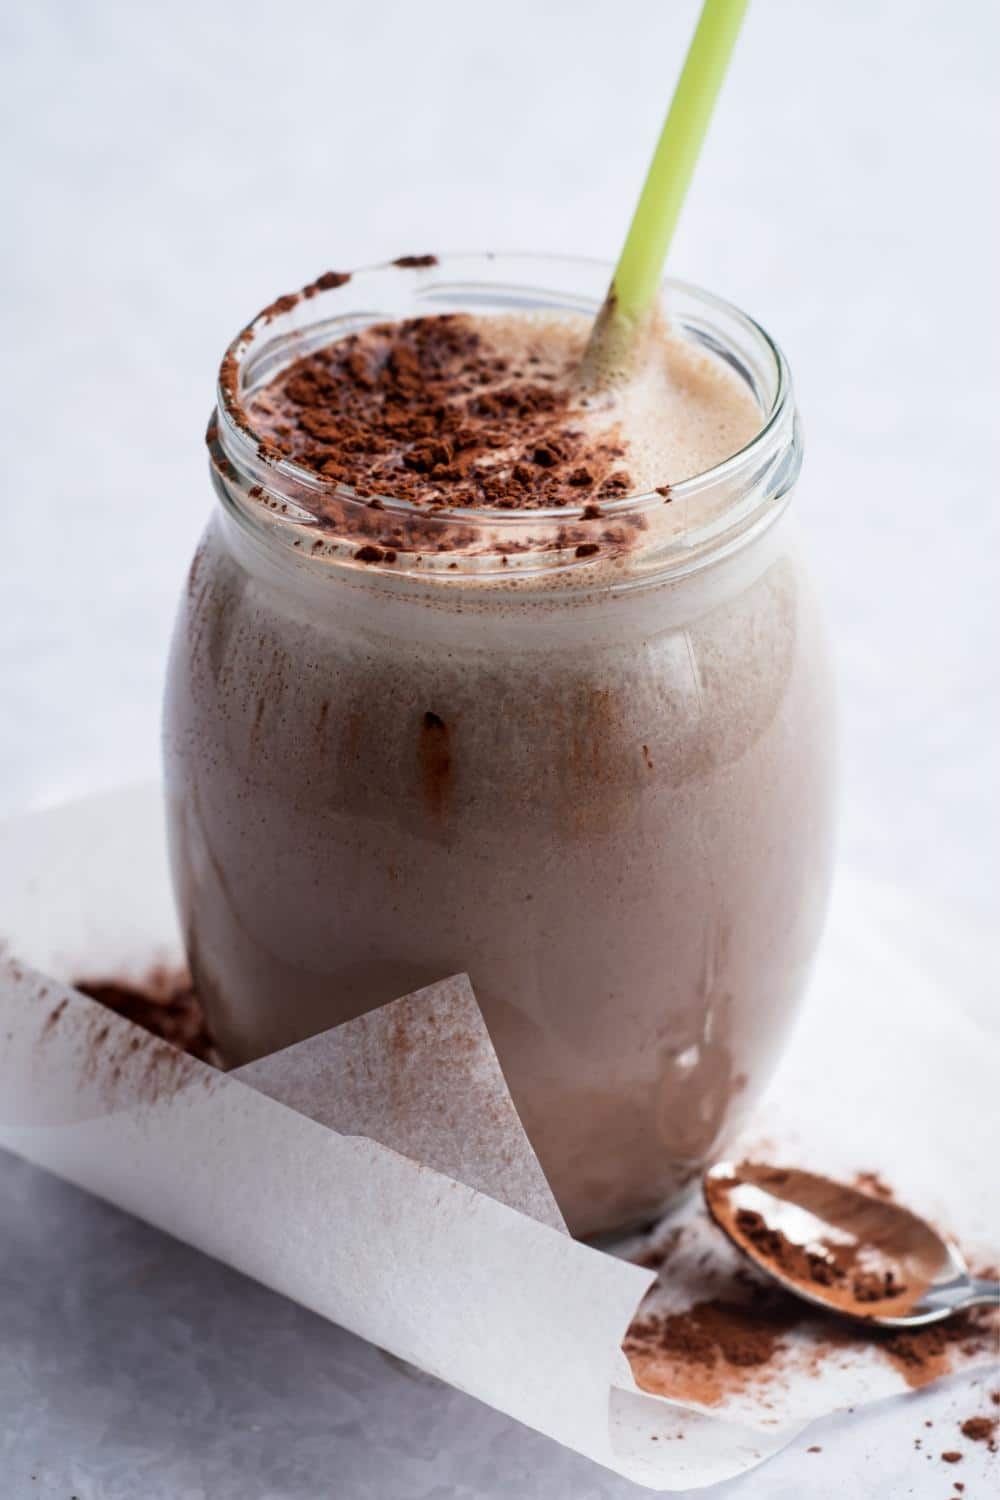 A mass gainer shake in a glass. It has cocoa powder on top and a green straw in it.